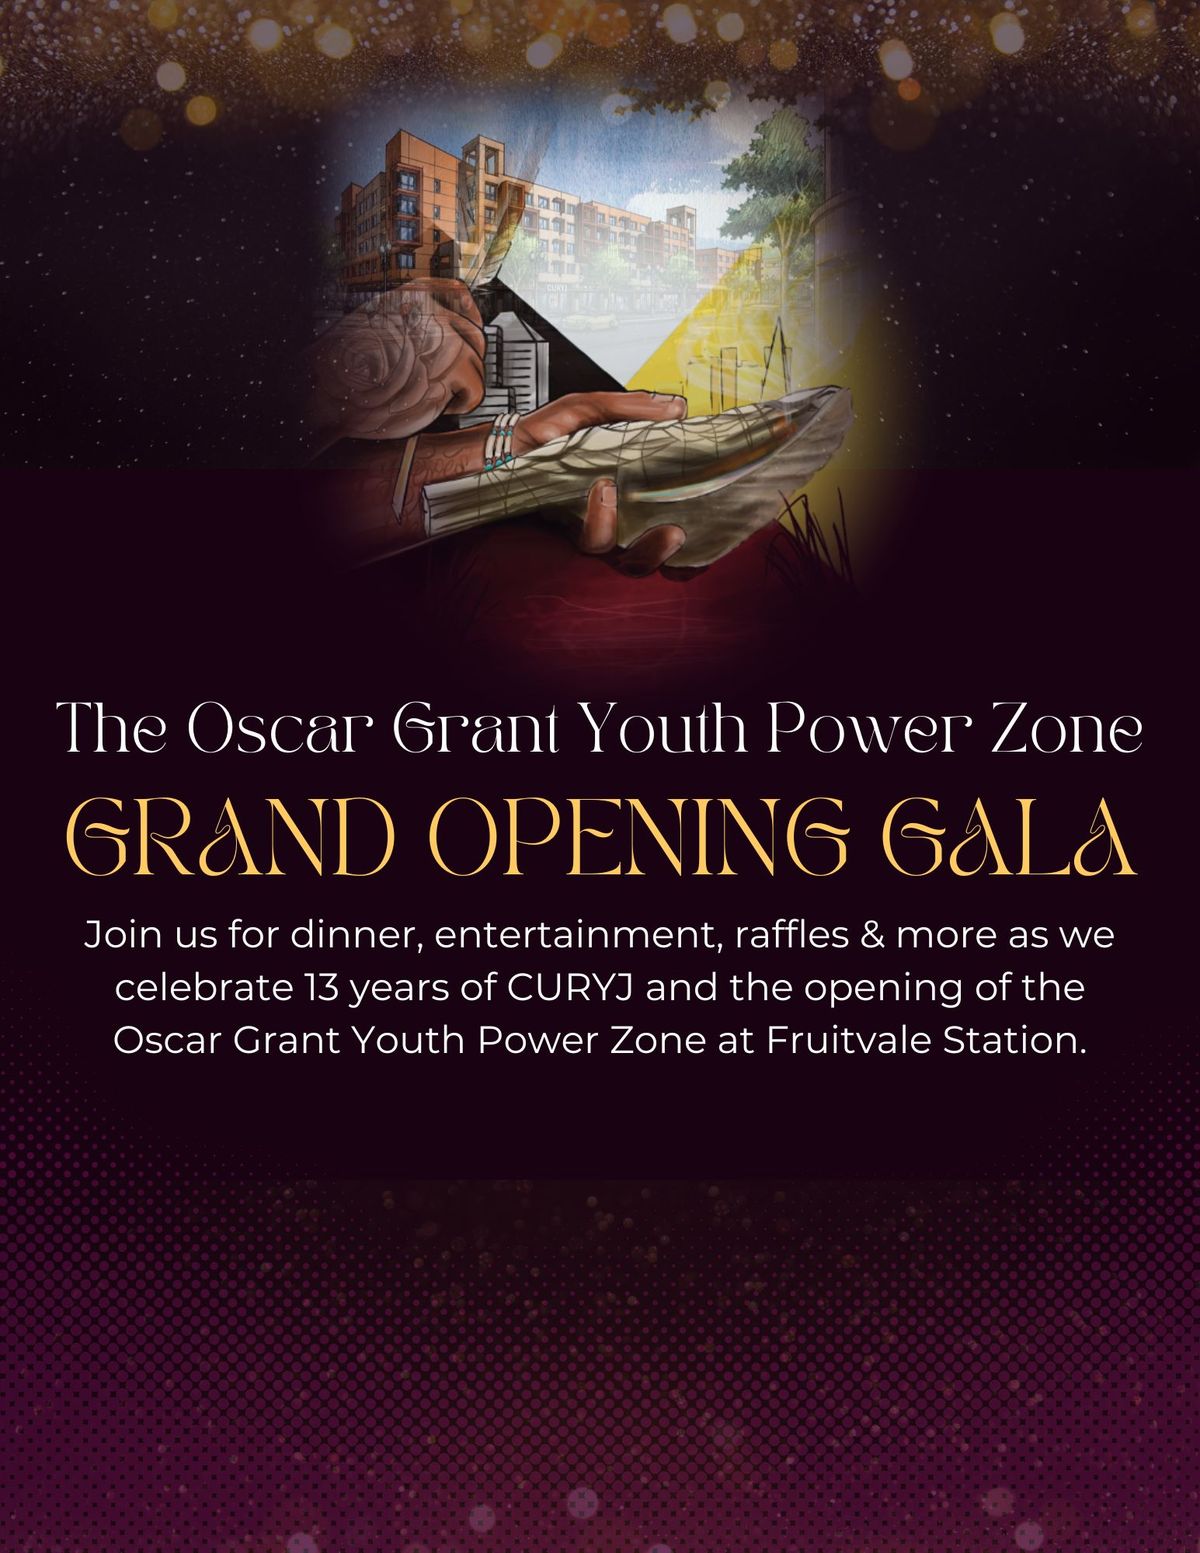 The Oscar Grant Youth Power Zone Grand Opening Gala